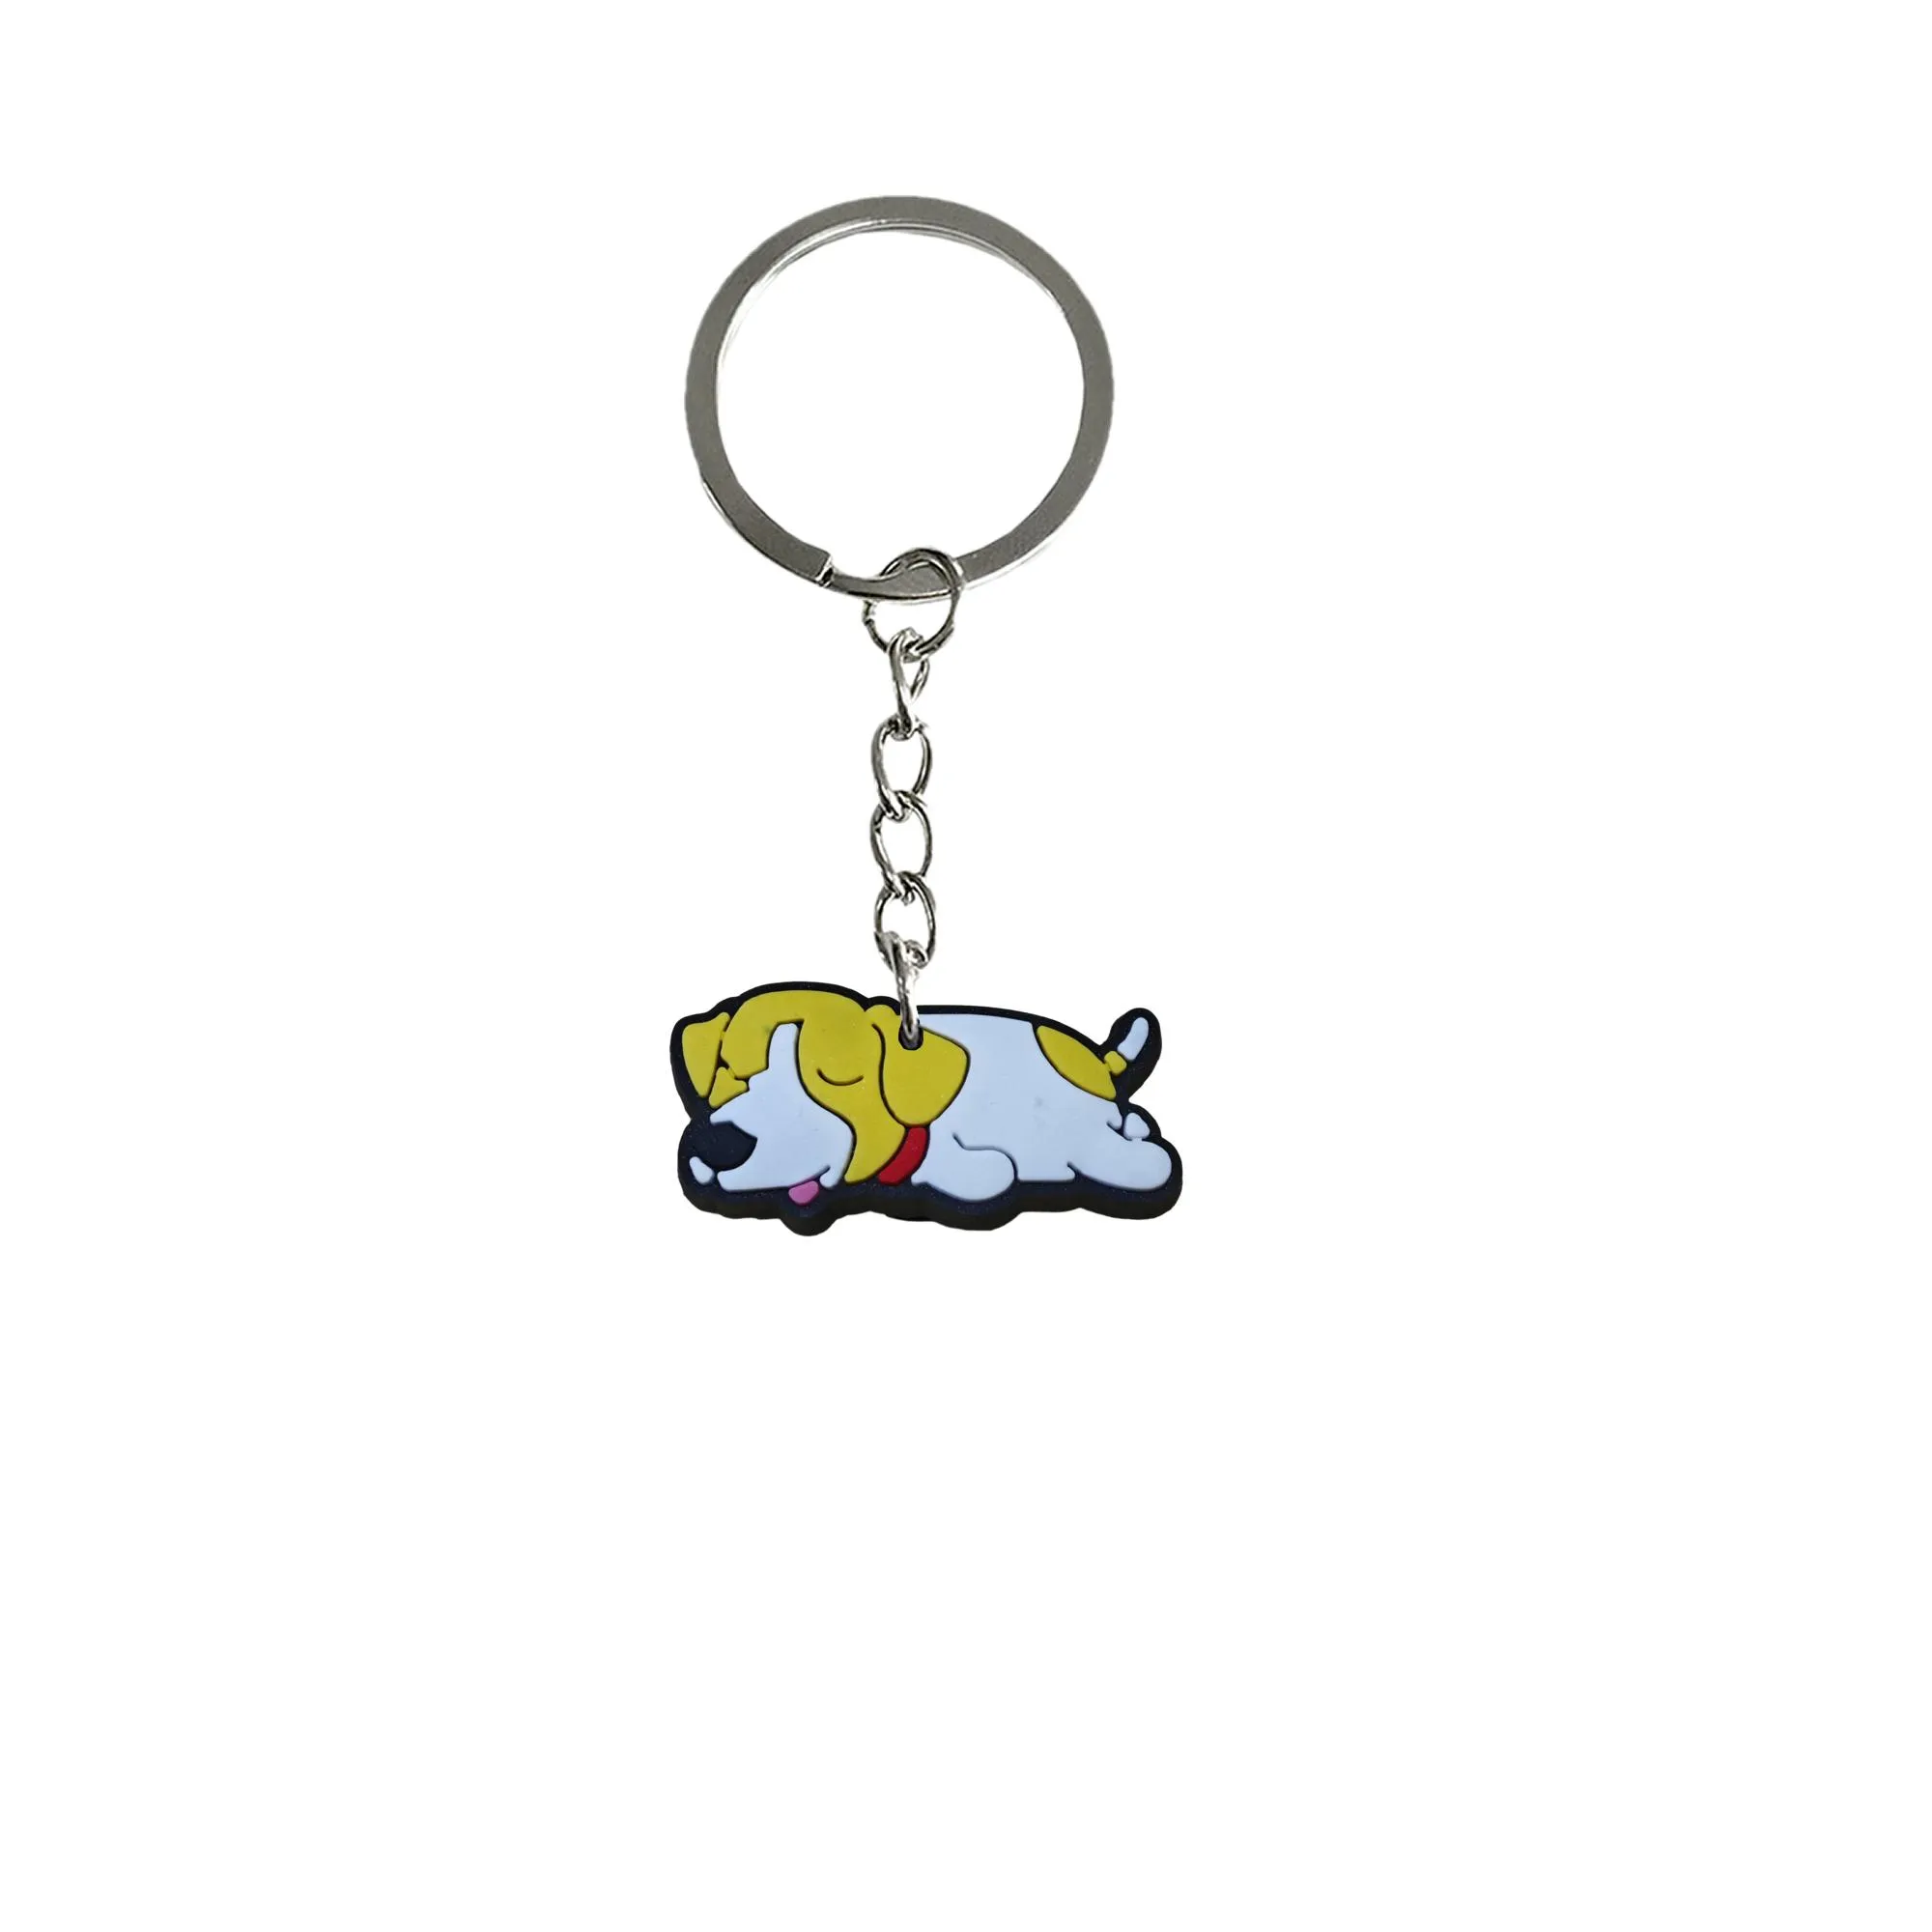 yellow dog keychain keyring for backpacks key ring women chain party favors gift suitable schoolbag pendant accessories bags rings keychains